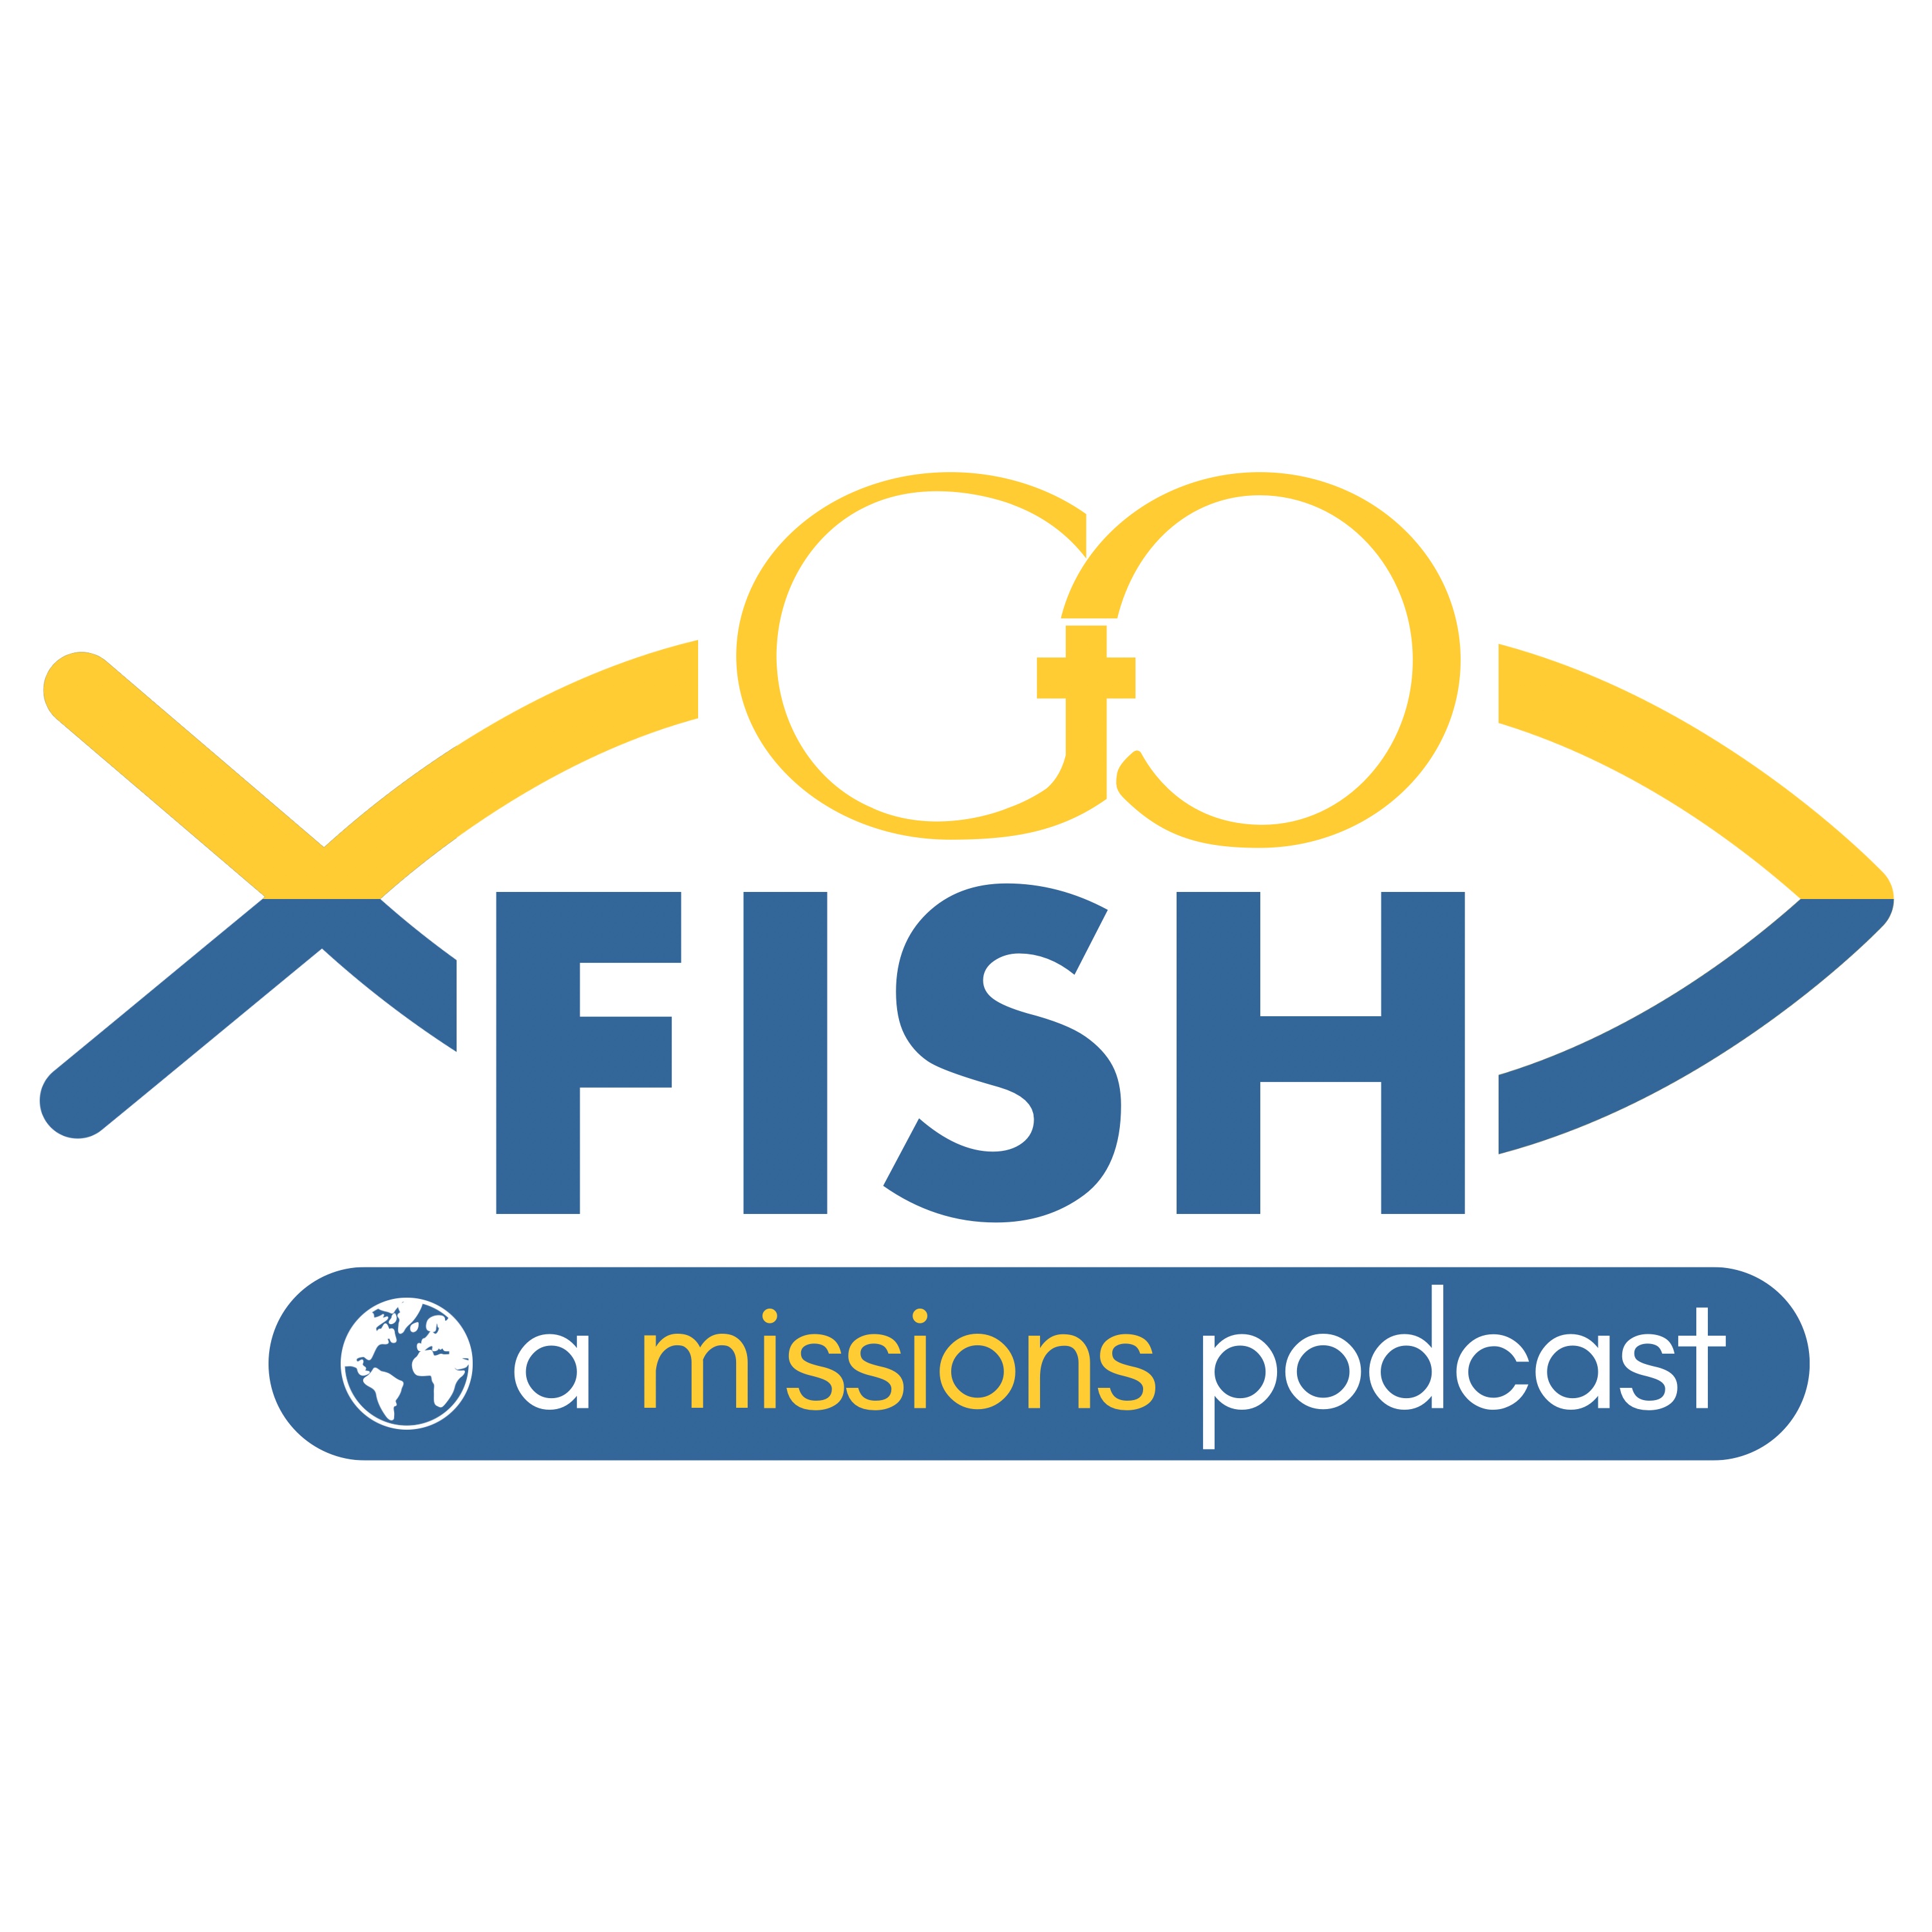 GO FISH: a missions podcast